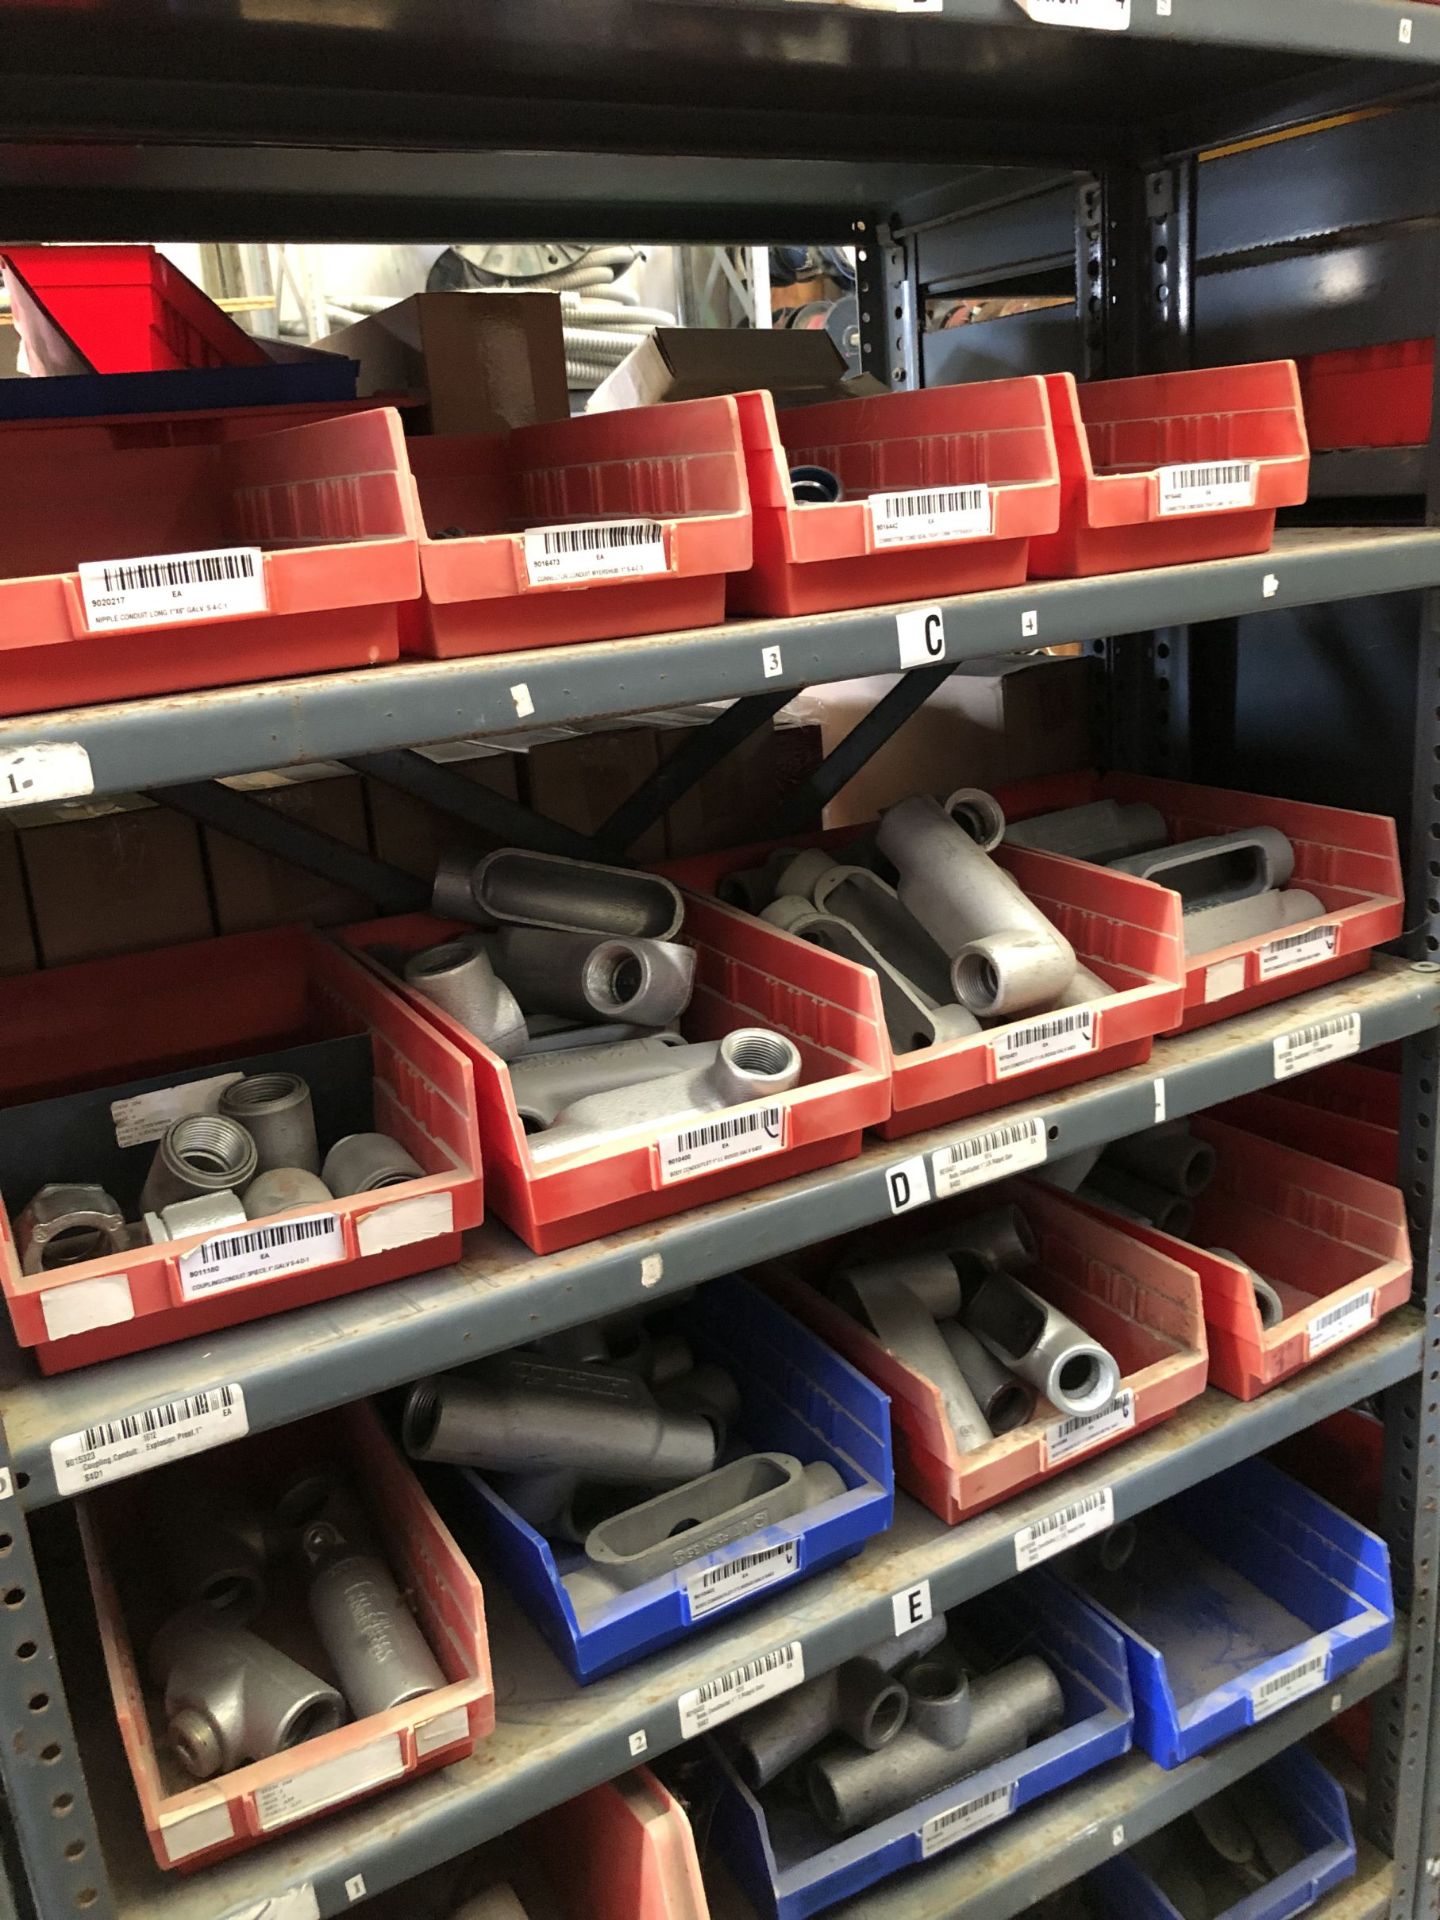 Maintenance Spares Lot: (10) Sections Of Light Duty Industrial Shelving and Contents - Image 15 of 26